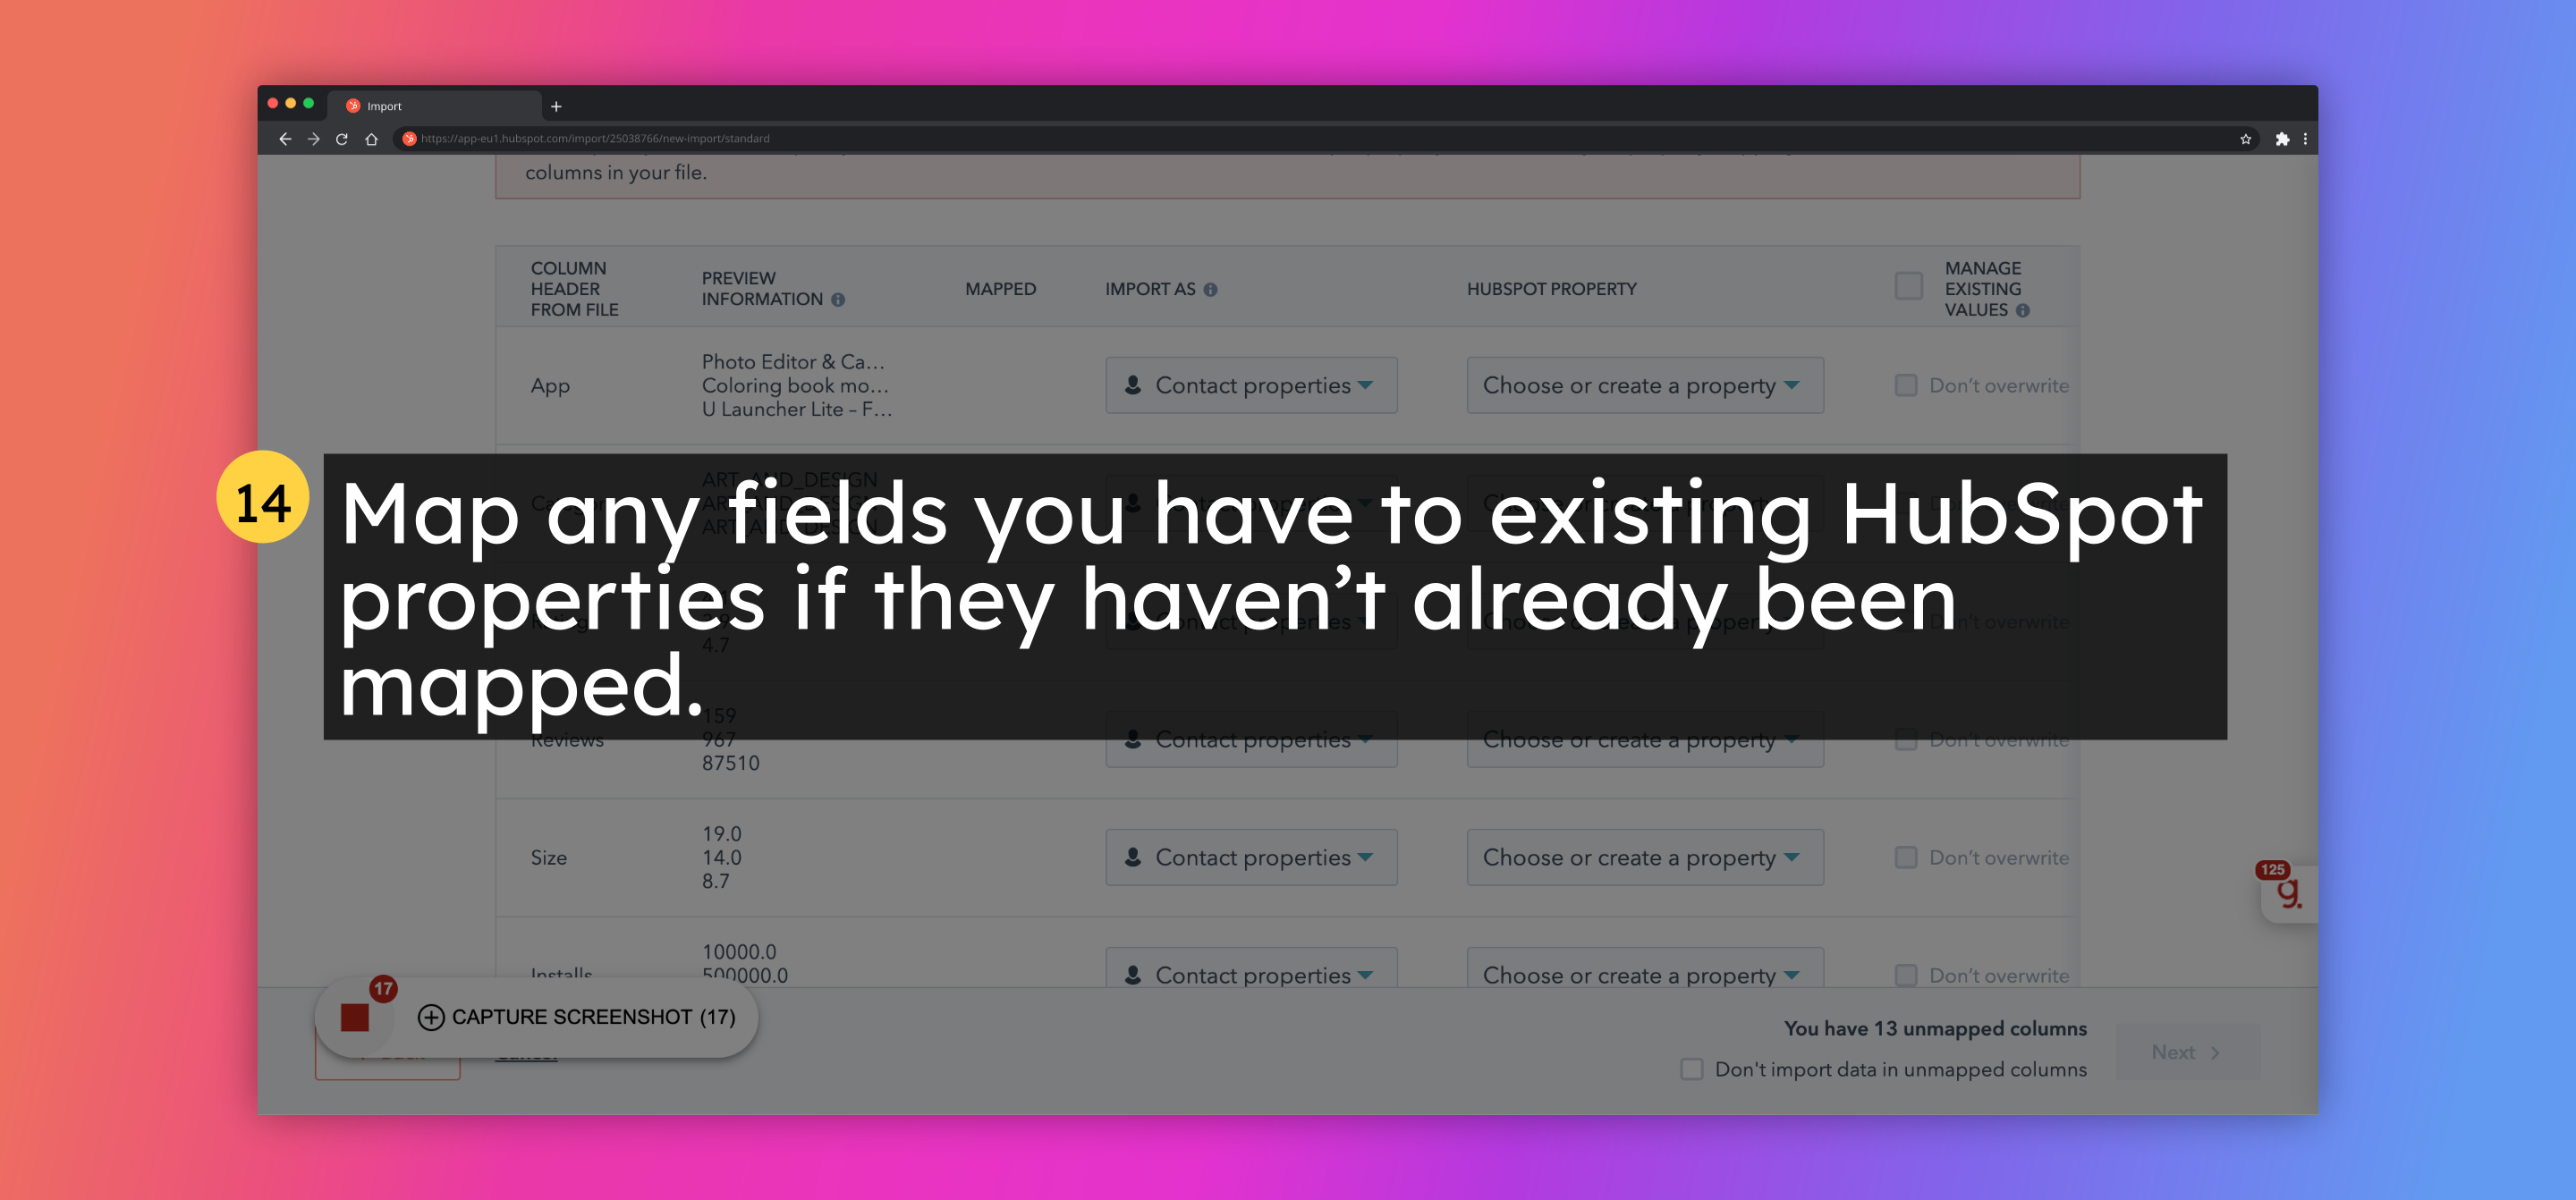 Map any fields you have to existing HubSpot properties if they haven’t already been mapped.